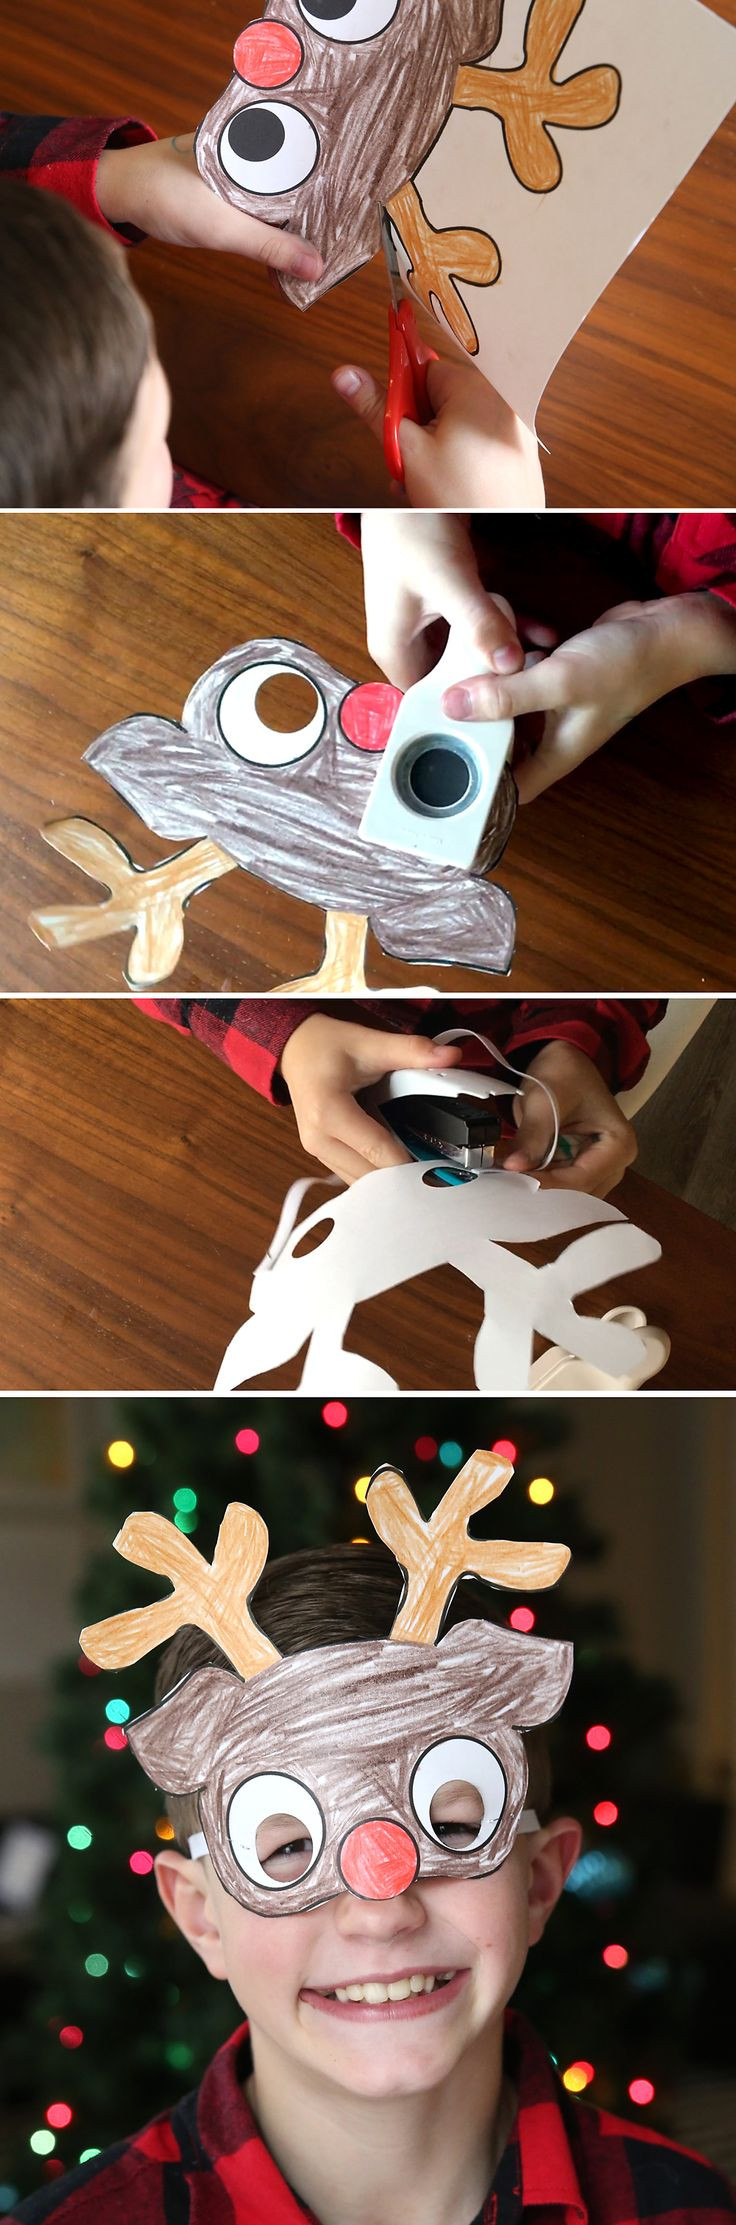 Cheap Christmas Crafts
 25 Best Ideas about Cheap Christmas Crafts on Pinterest